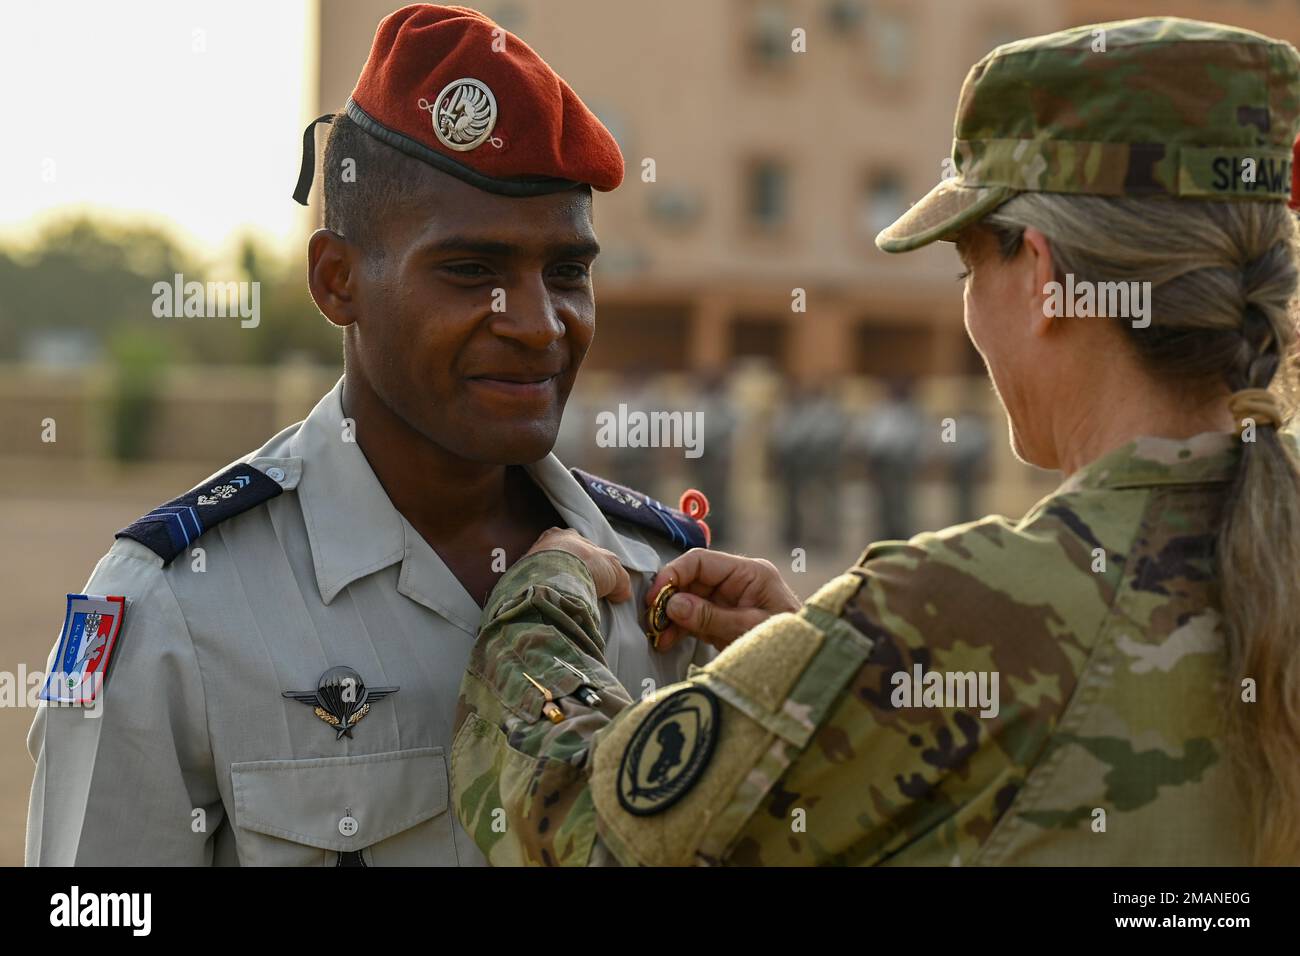 U.S. Army Maj. Gen. Jami Shawley, commanding general of Combined Joint Task Force - Horn of Africa (CJTF-HOA), pins a desert commando badge on a French soldier during a French Desert Commando Course graduation ceremony at the 5th Overseas Interarms Regiment, Djibouti, June 1, 2022. Members of the CJTF-HOA regularly train and work alongside allies, partners, and government organizations to achieve a unified effort to improve safety, security and prosperity in East Africa. Stock Photo